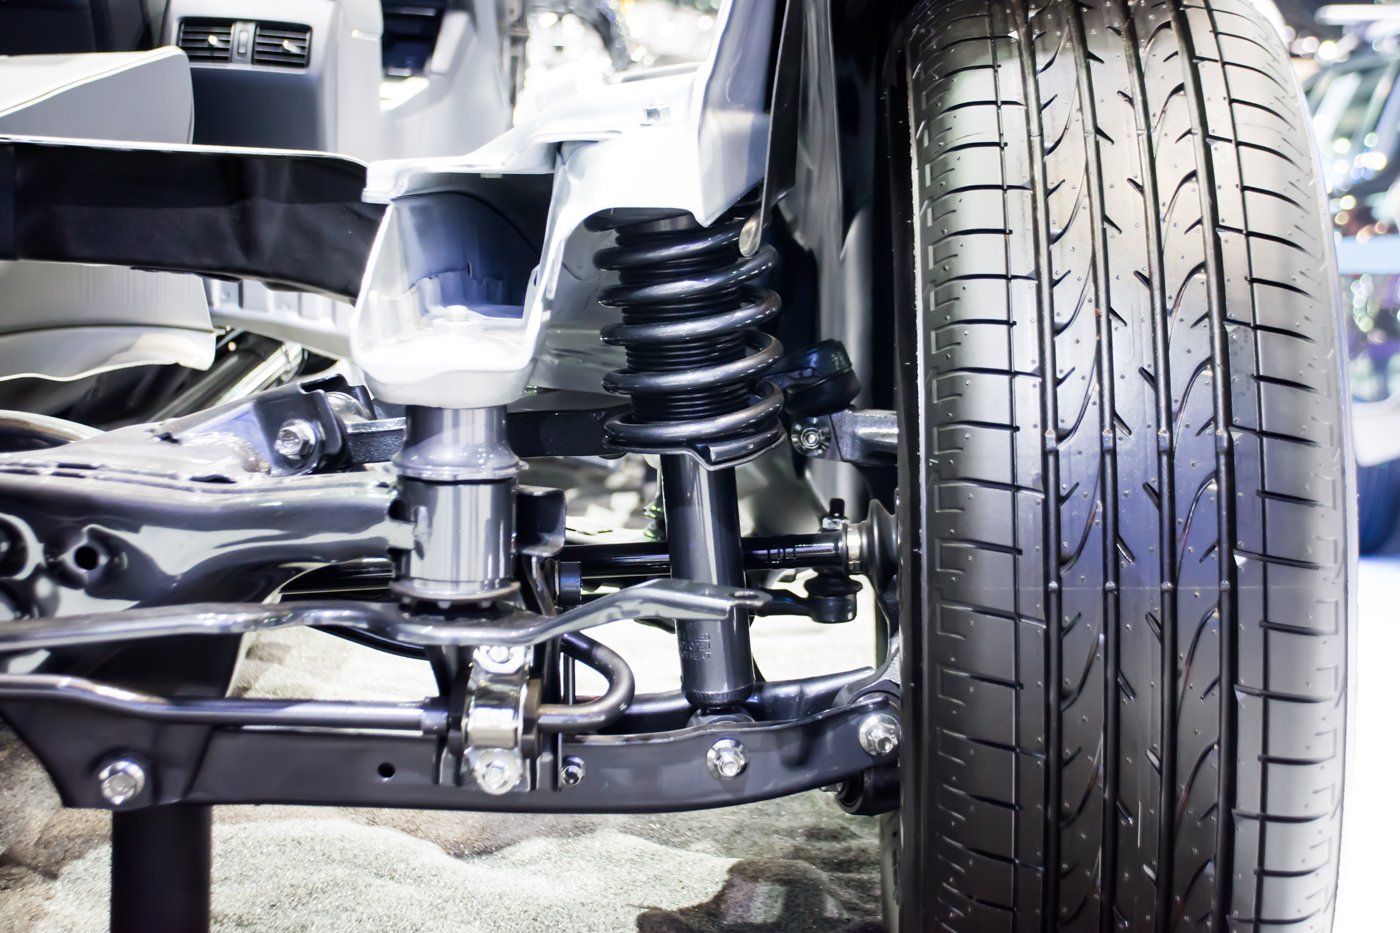 View of a car suspension